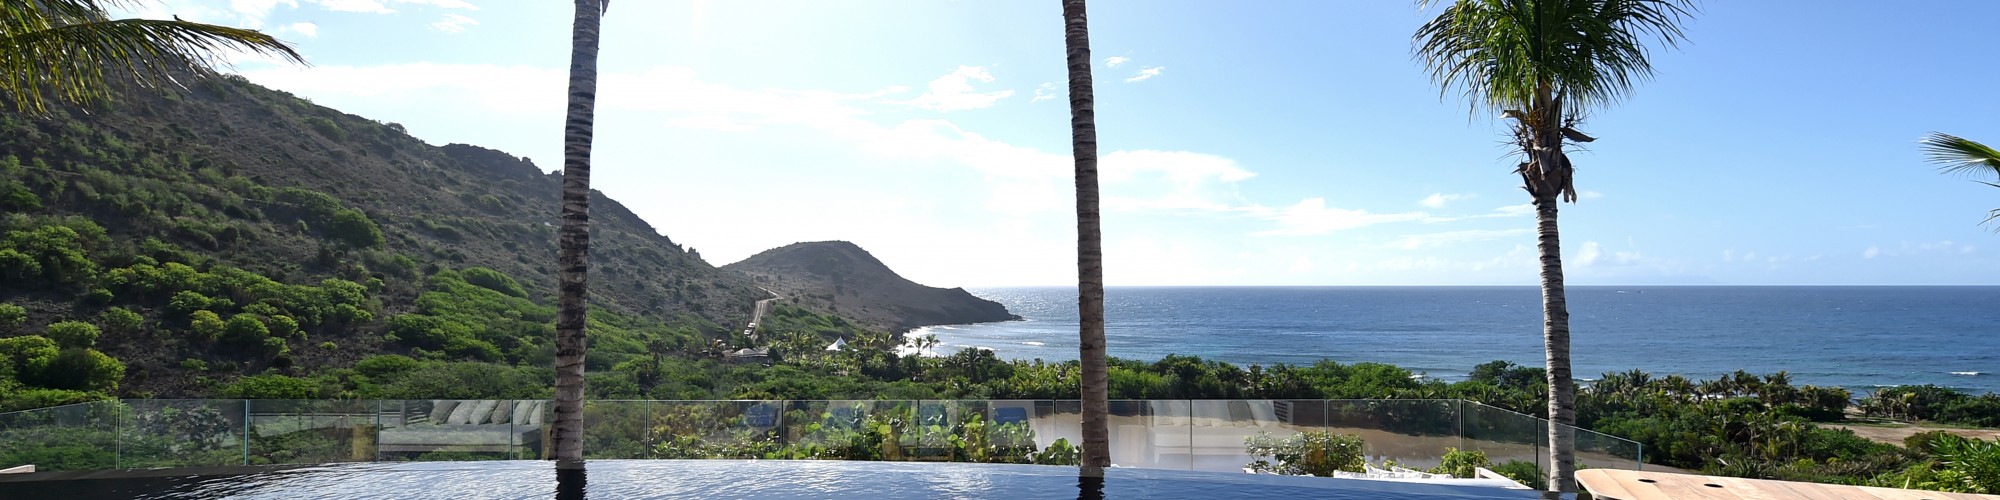 Hotel Le Toiny, St Barths